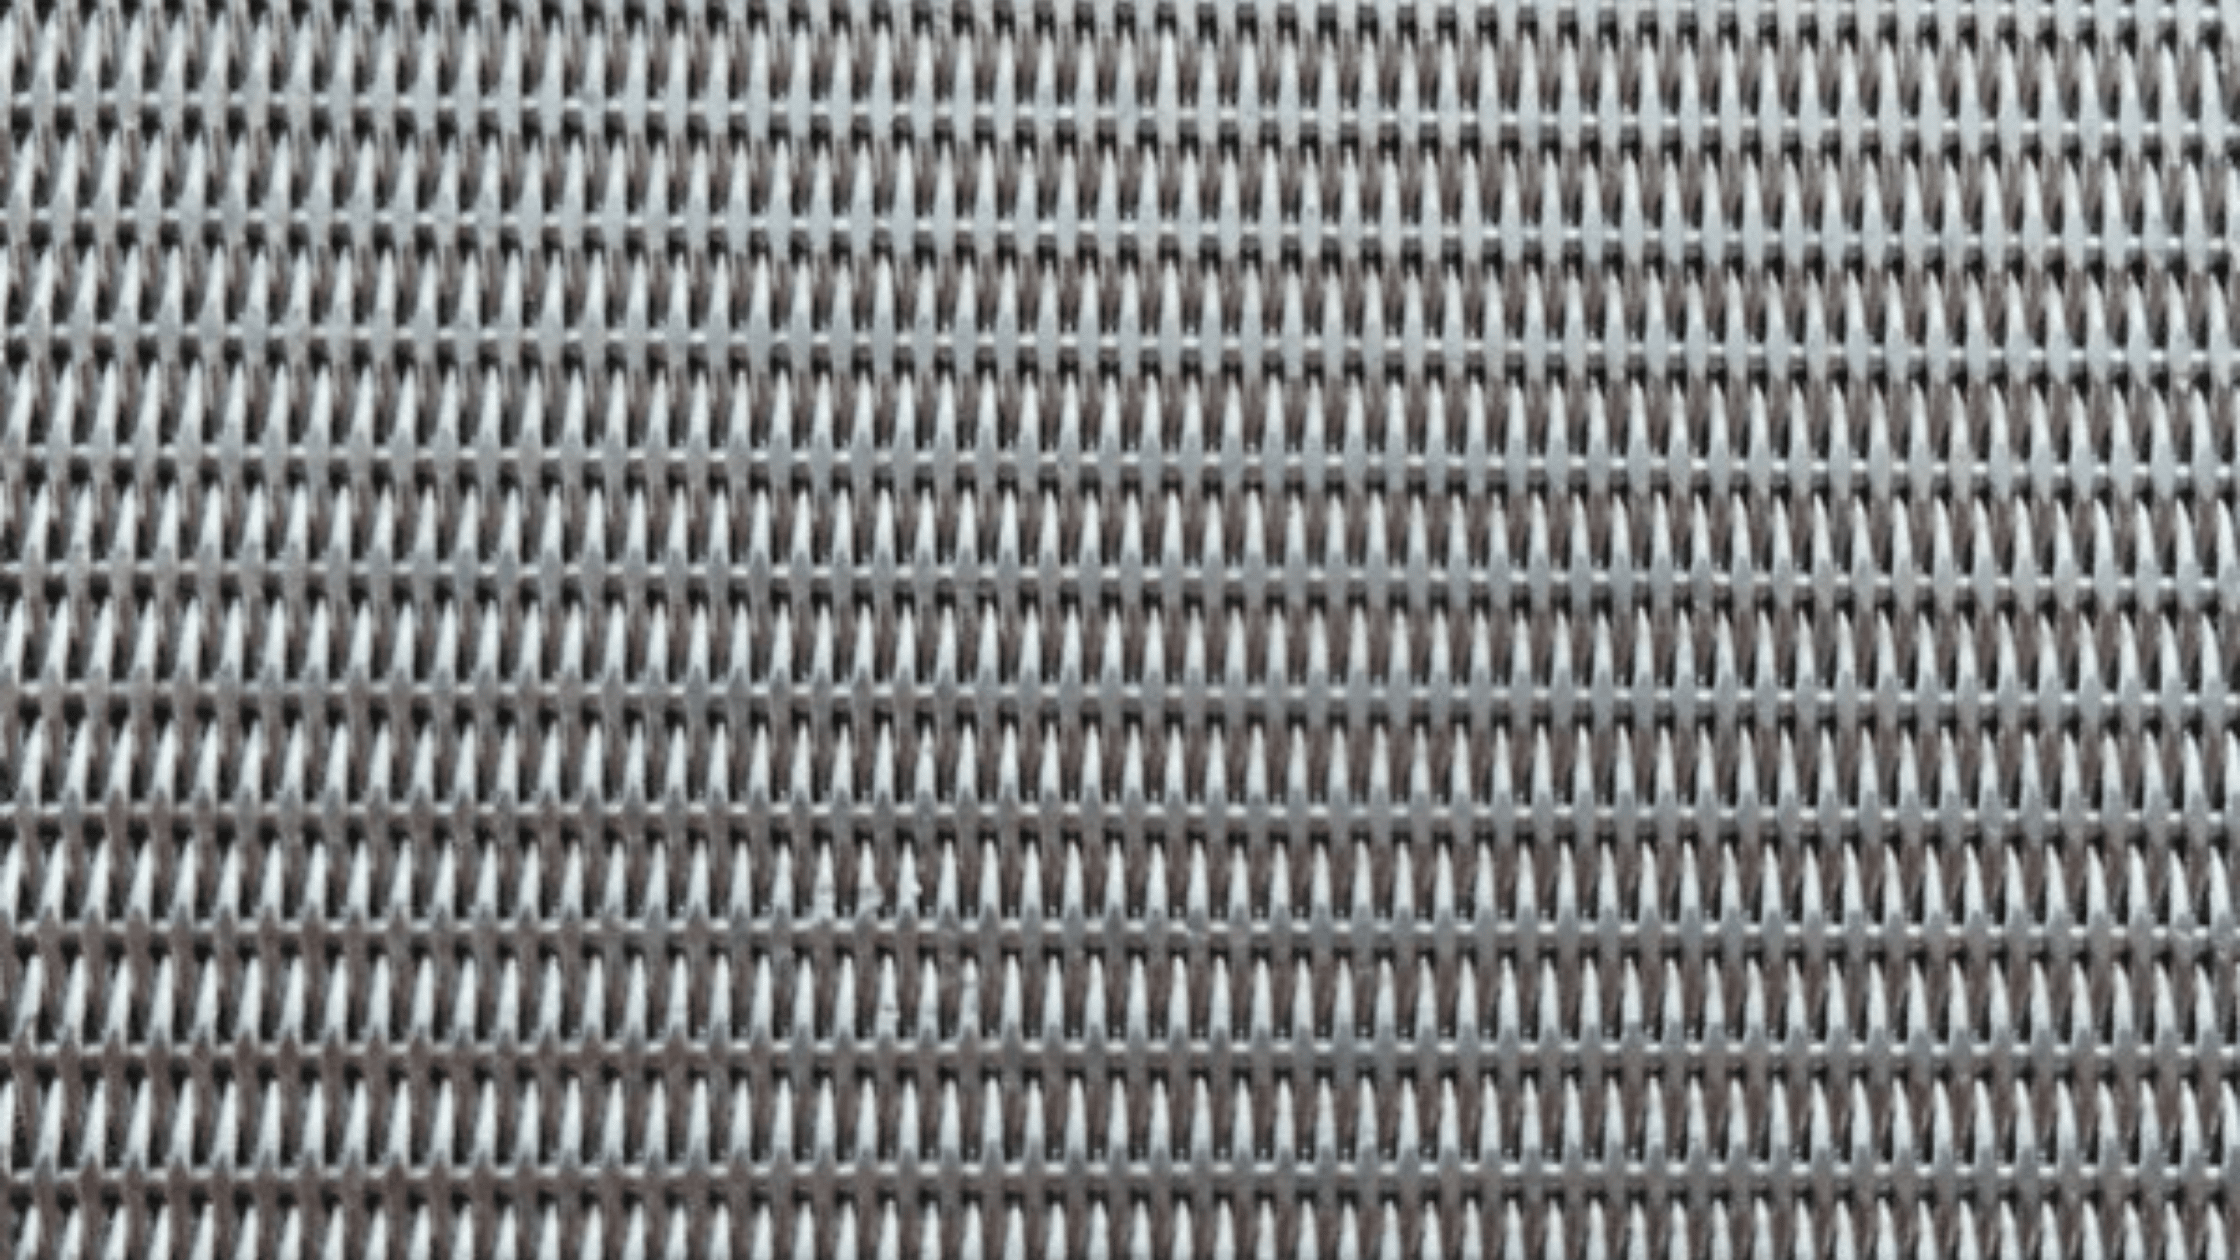 Wire Mesh: A Guide to the Right Product